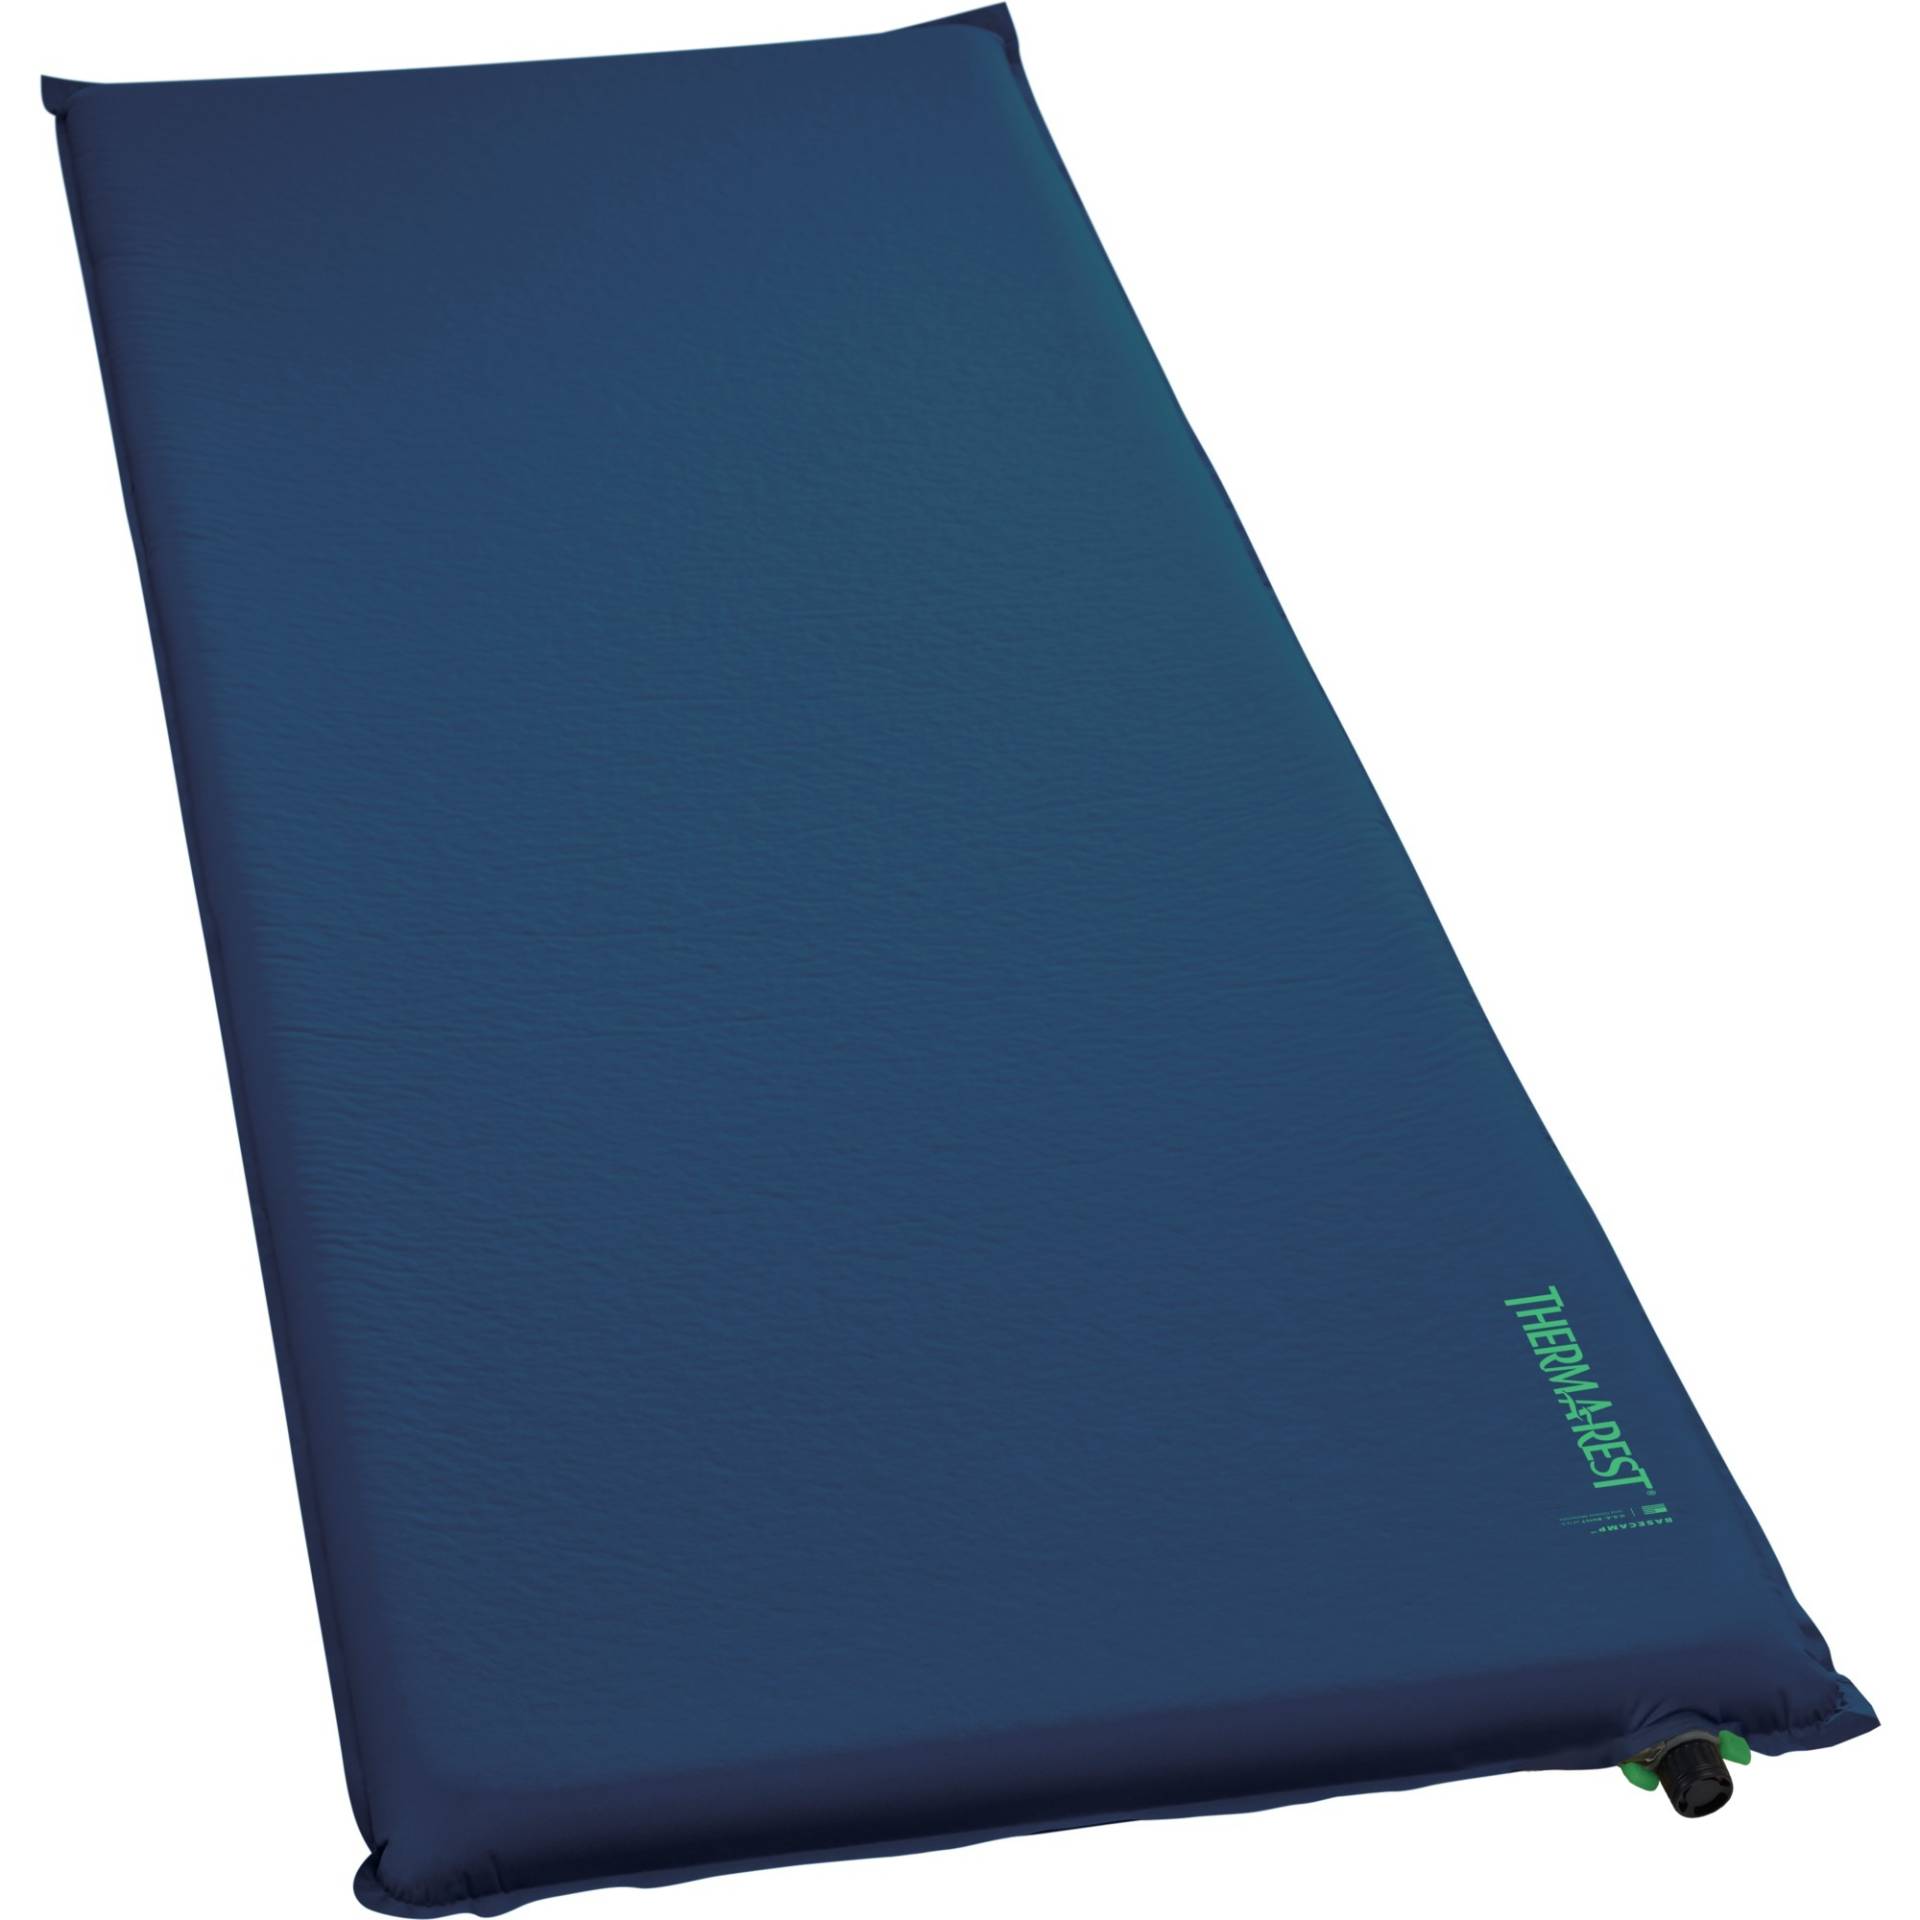 BaseCamp XLarge 13283, Camping-Matte von Therm-A-Rest